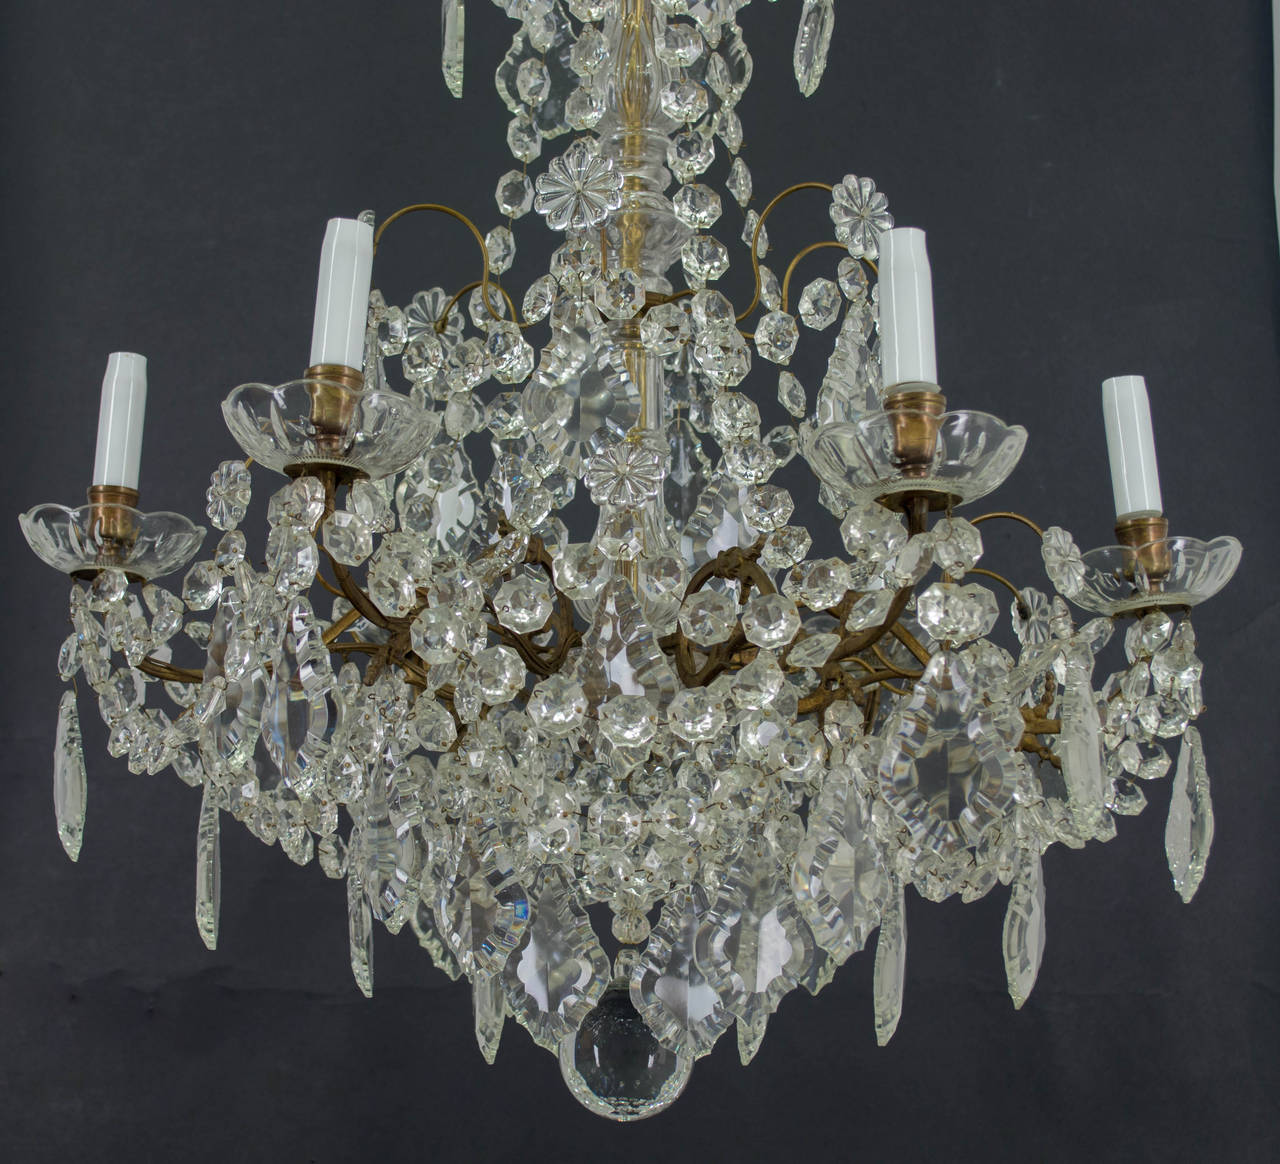 French six light chandelier with molded crystal boboche and an assortment of crystal prisms and chains. Brass frame. original white glass candle covers. Wired using European sockets. More photos available upon request.Please visit our web site for a